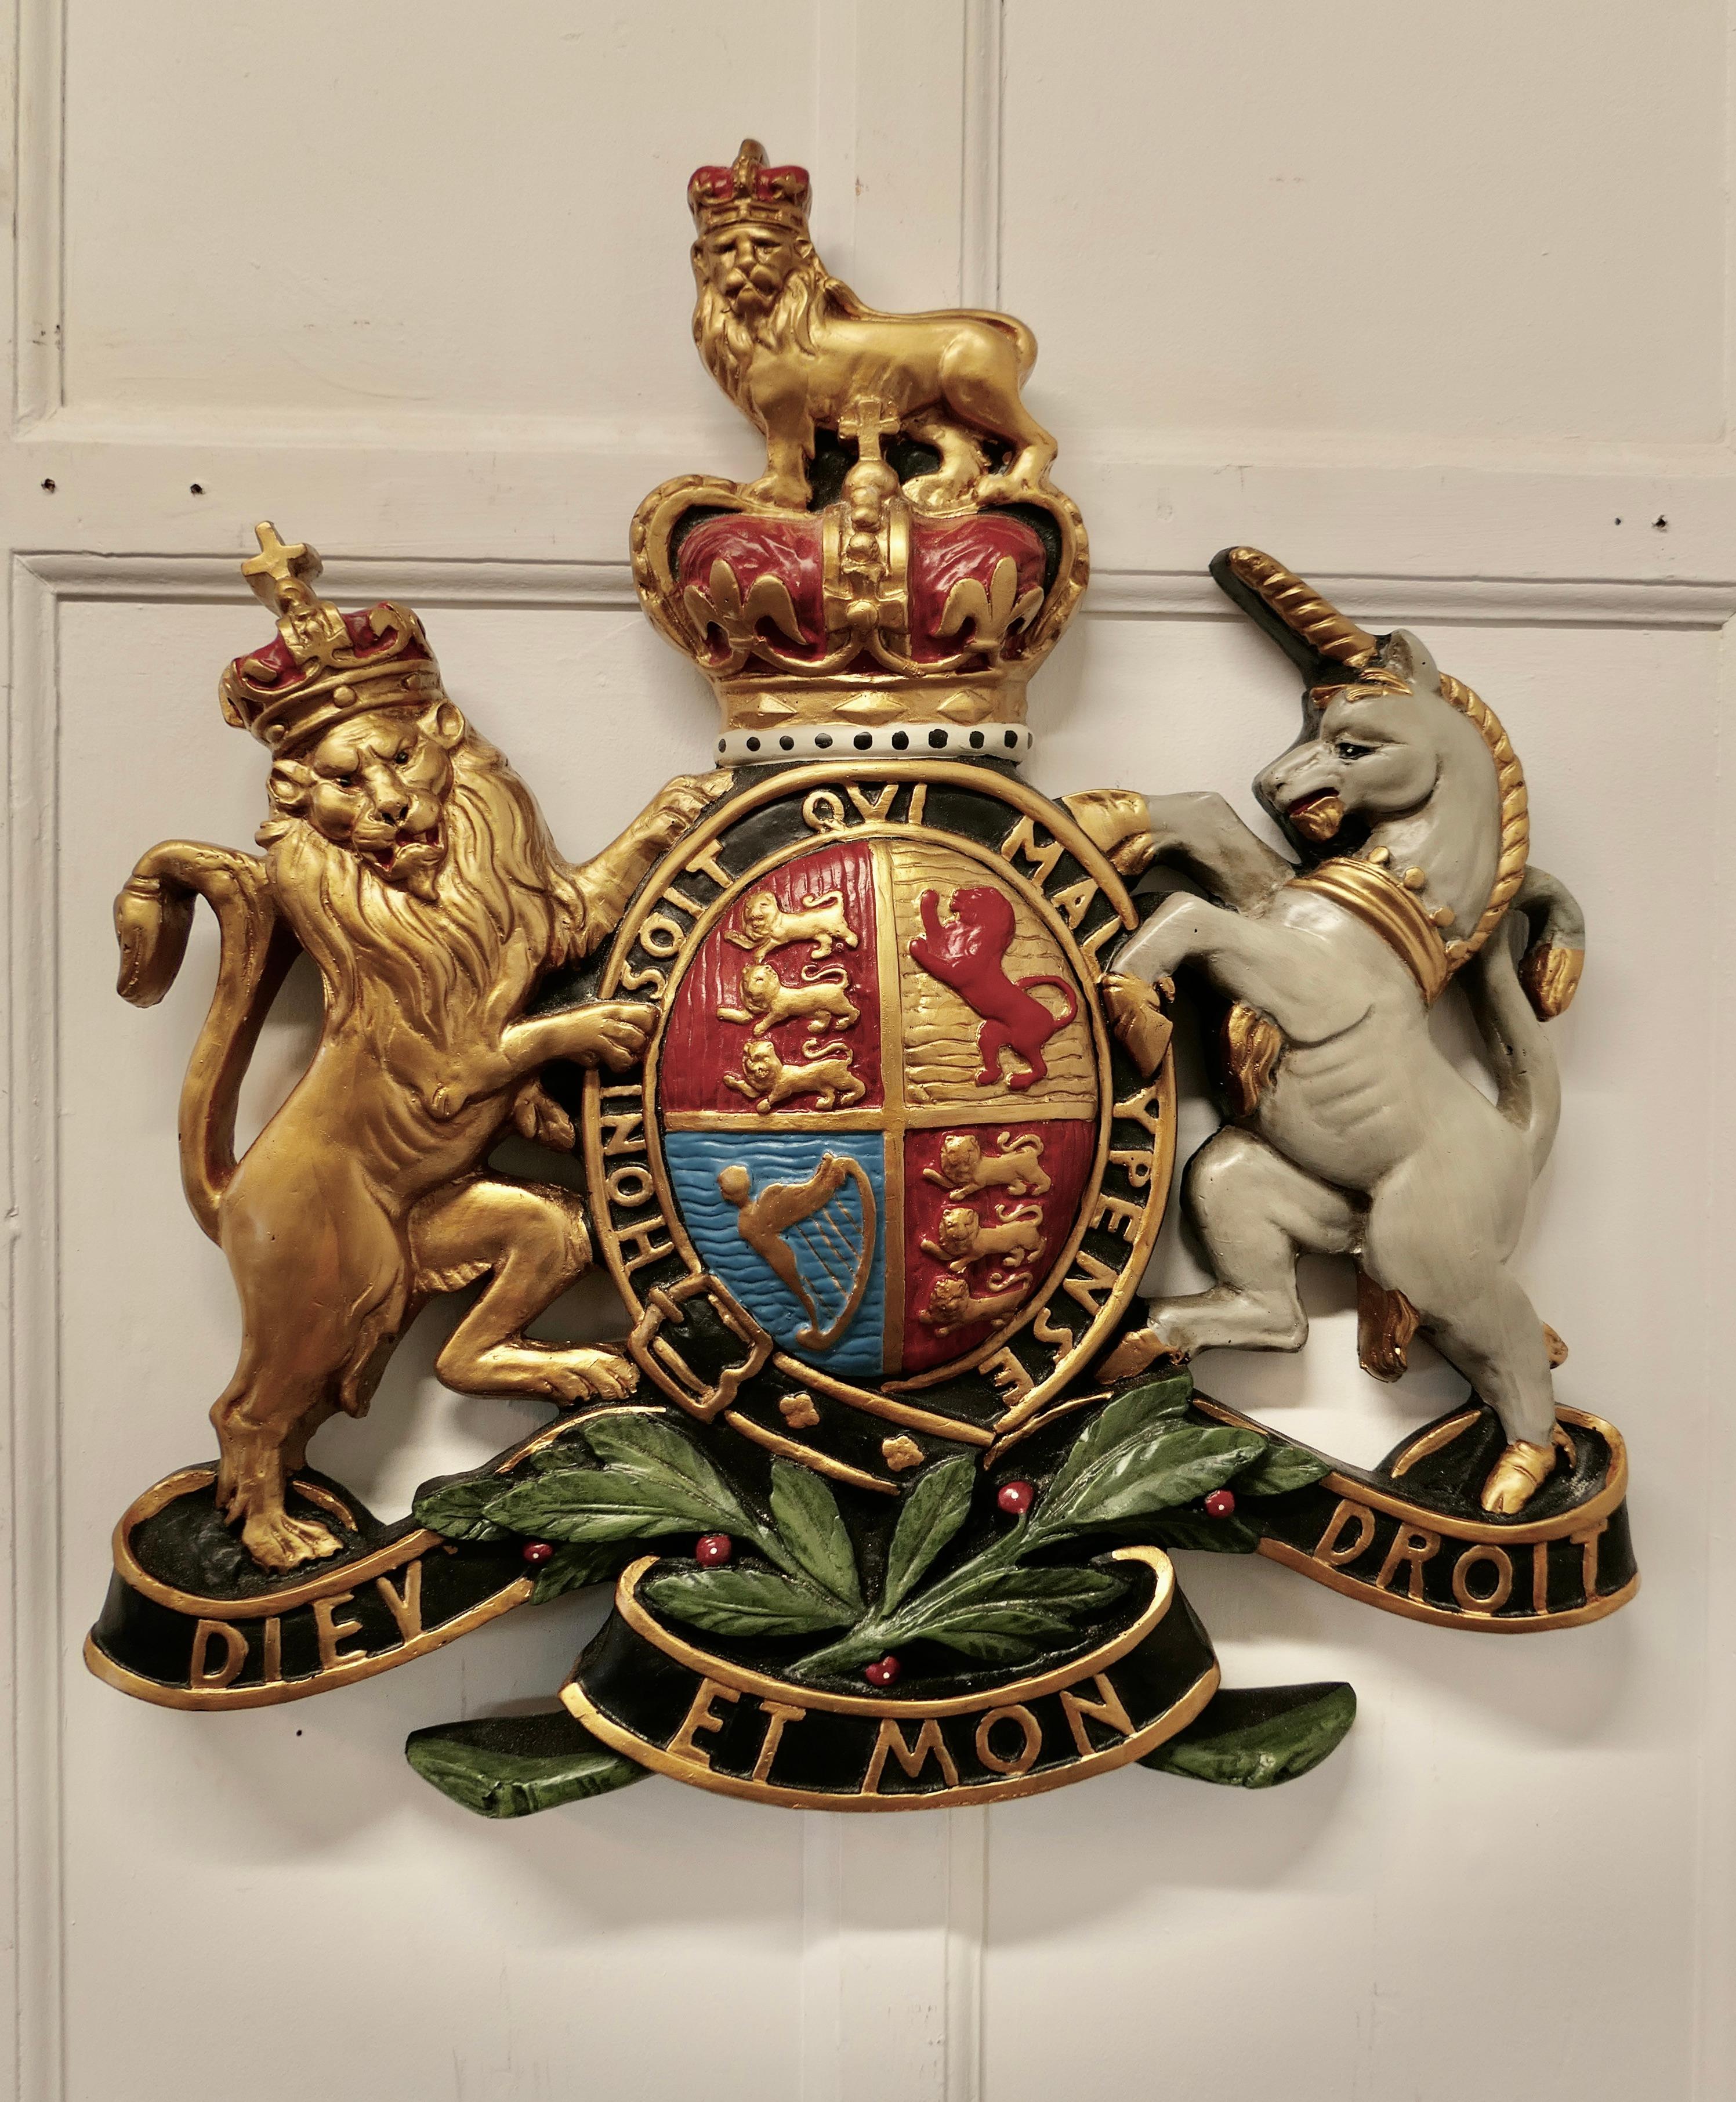 British royal coat of arms wall plaque

This is a large scale piece, it dates from the 1950s and is made in plaster and it is painted in very bright colours,

The plaque has metal fixings set into it at the back so it can be wall hung without